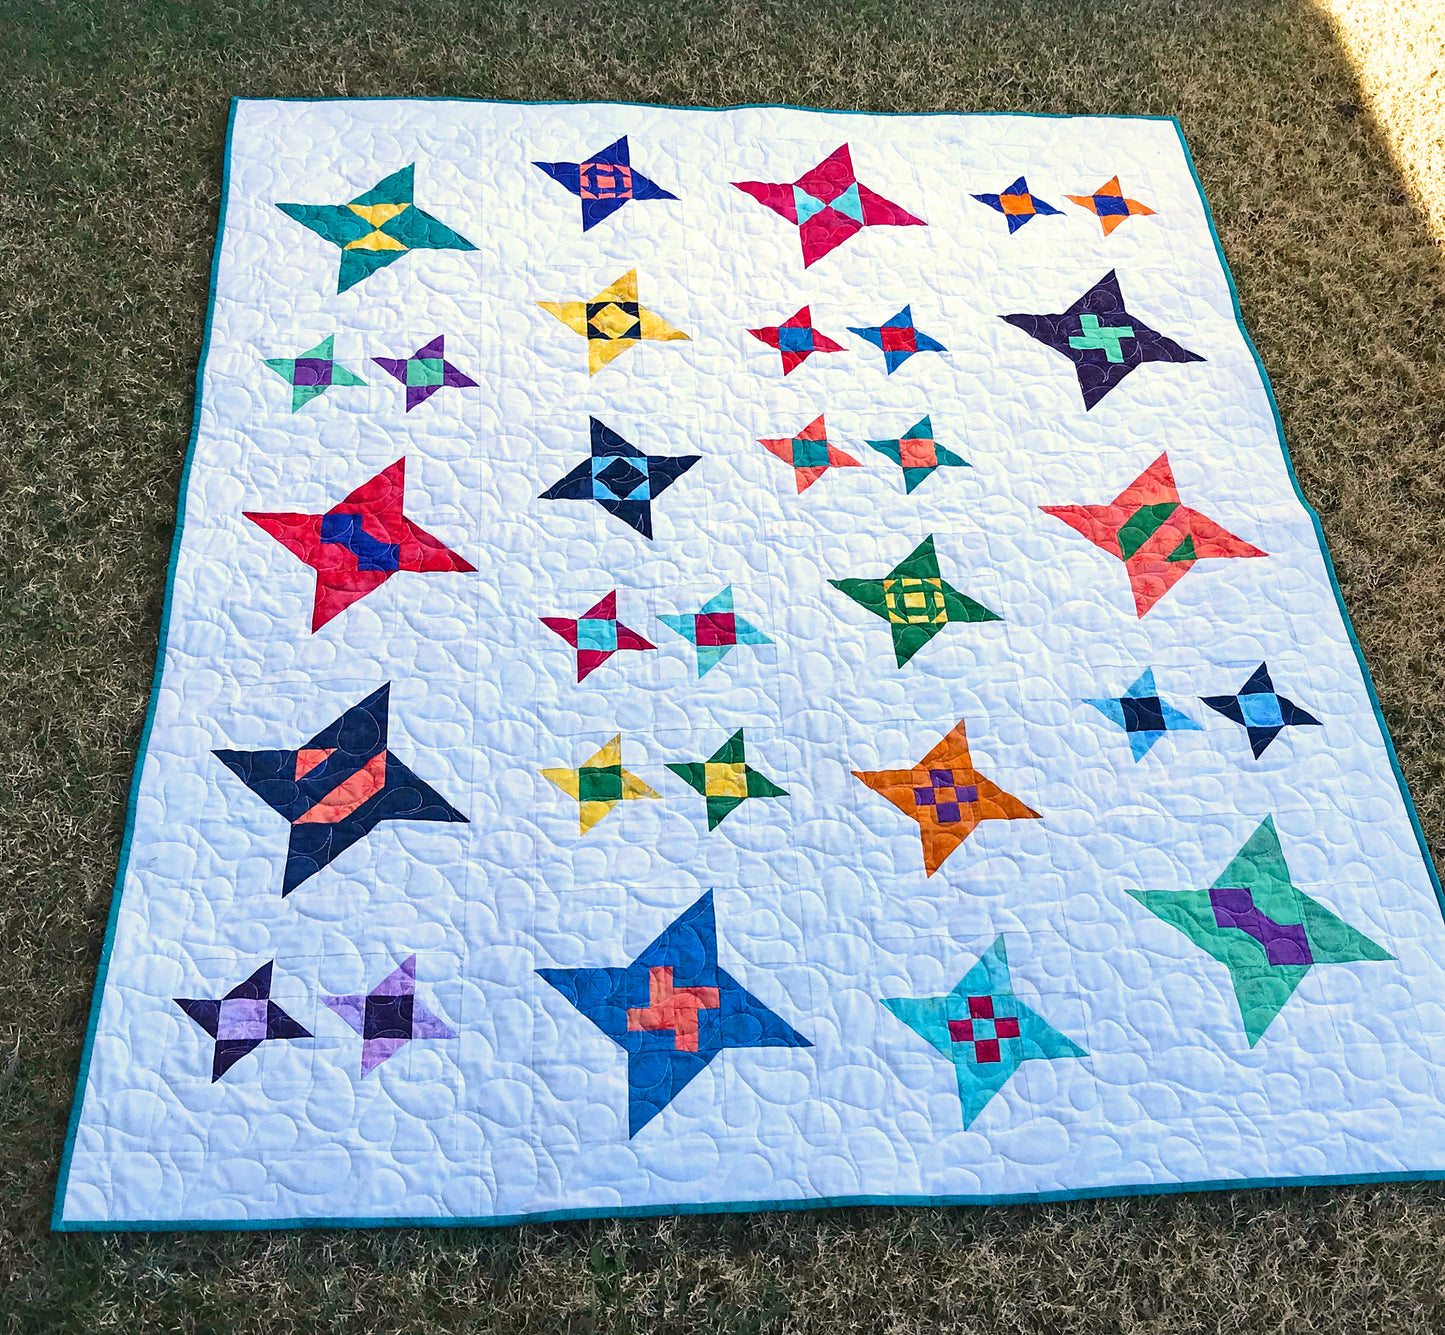 Star Gazing modern star sampler quilt pattern displayed on a lawn. Stars are in various sizes with various fabrics on a white background.